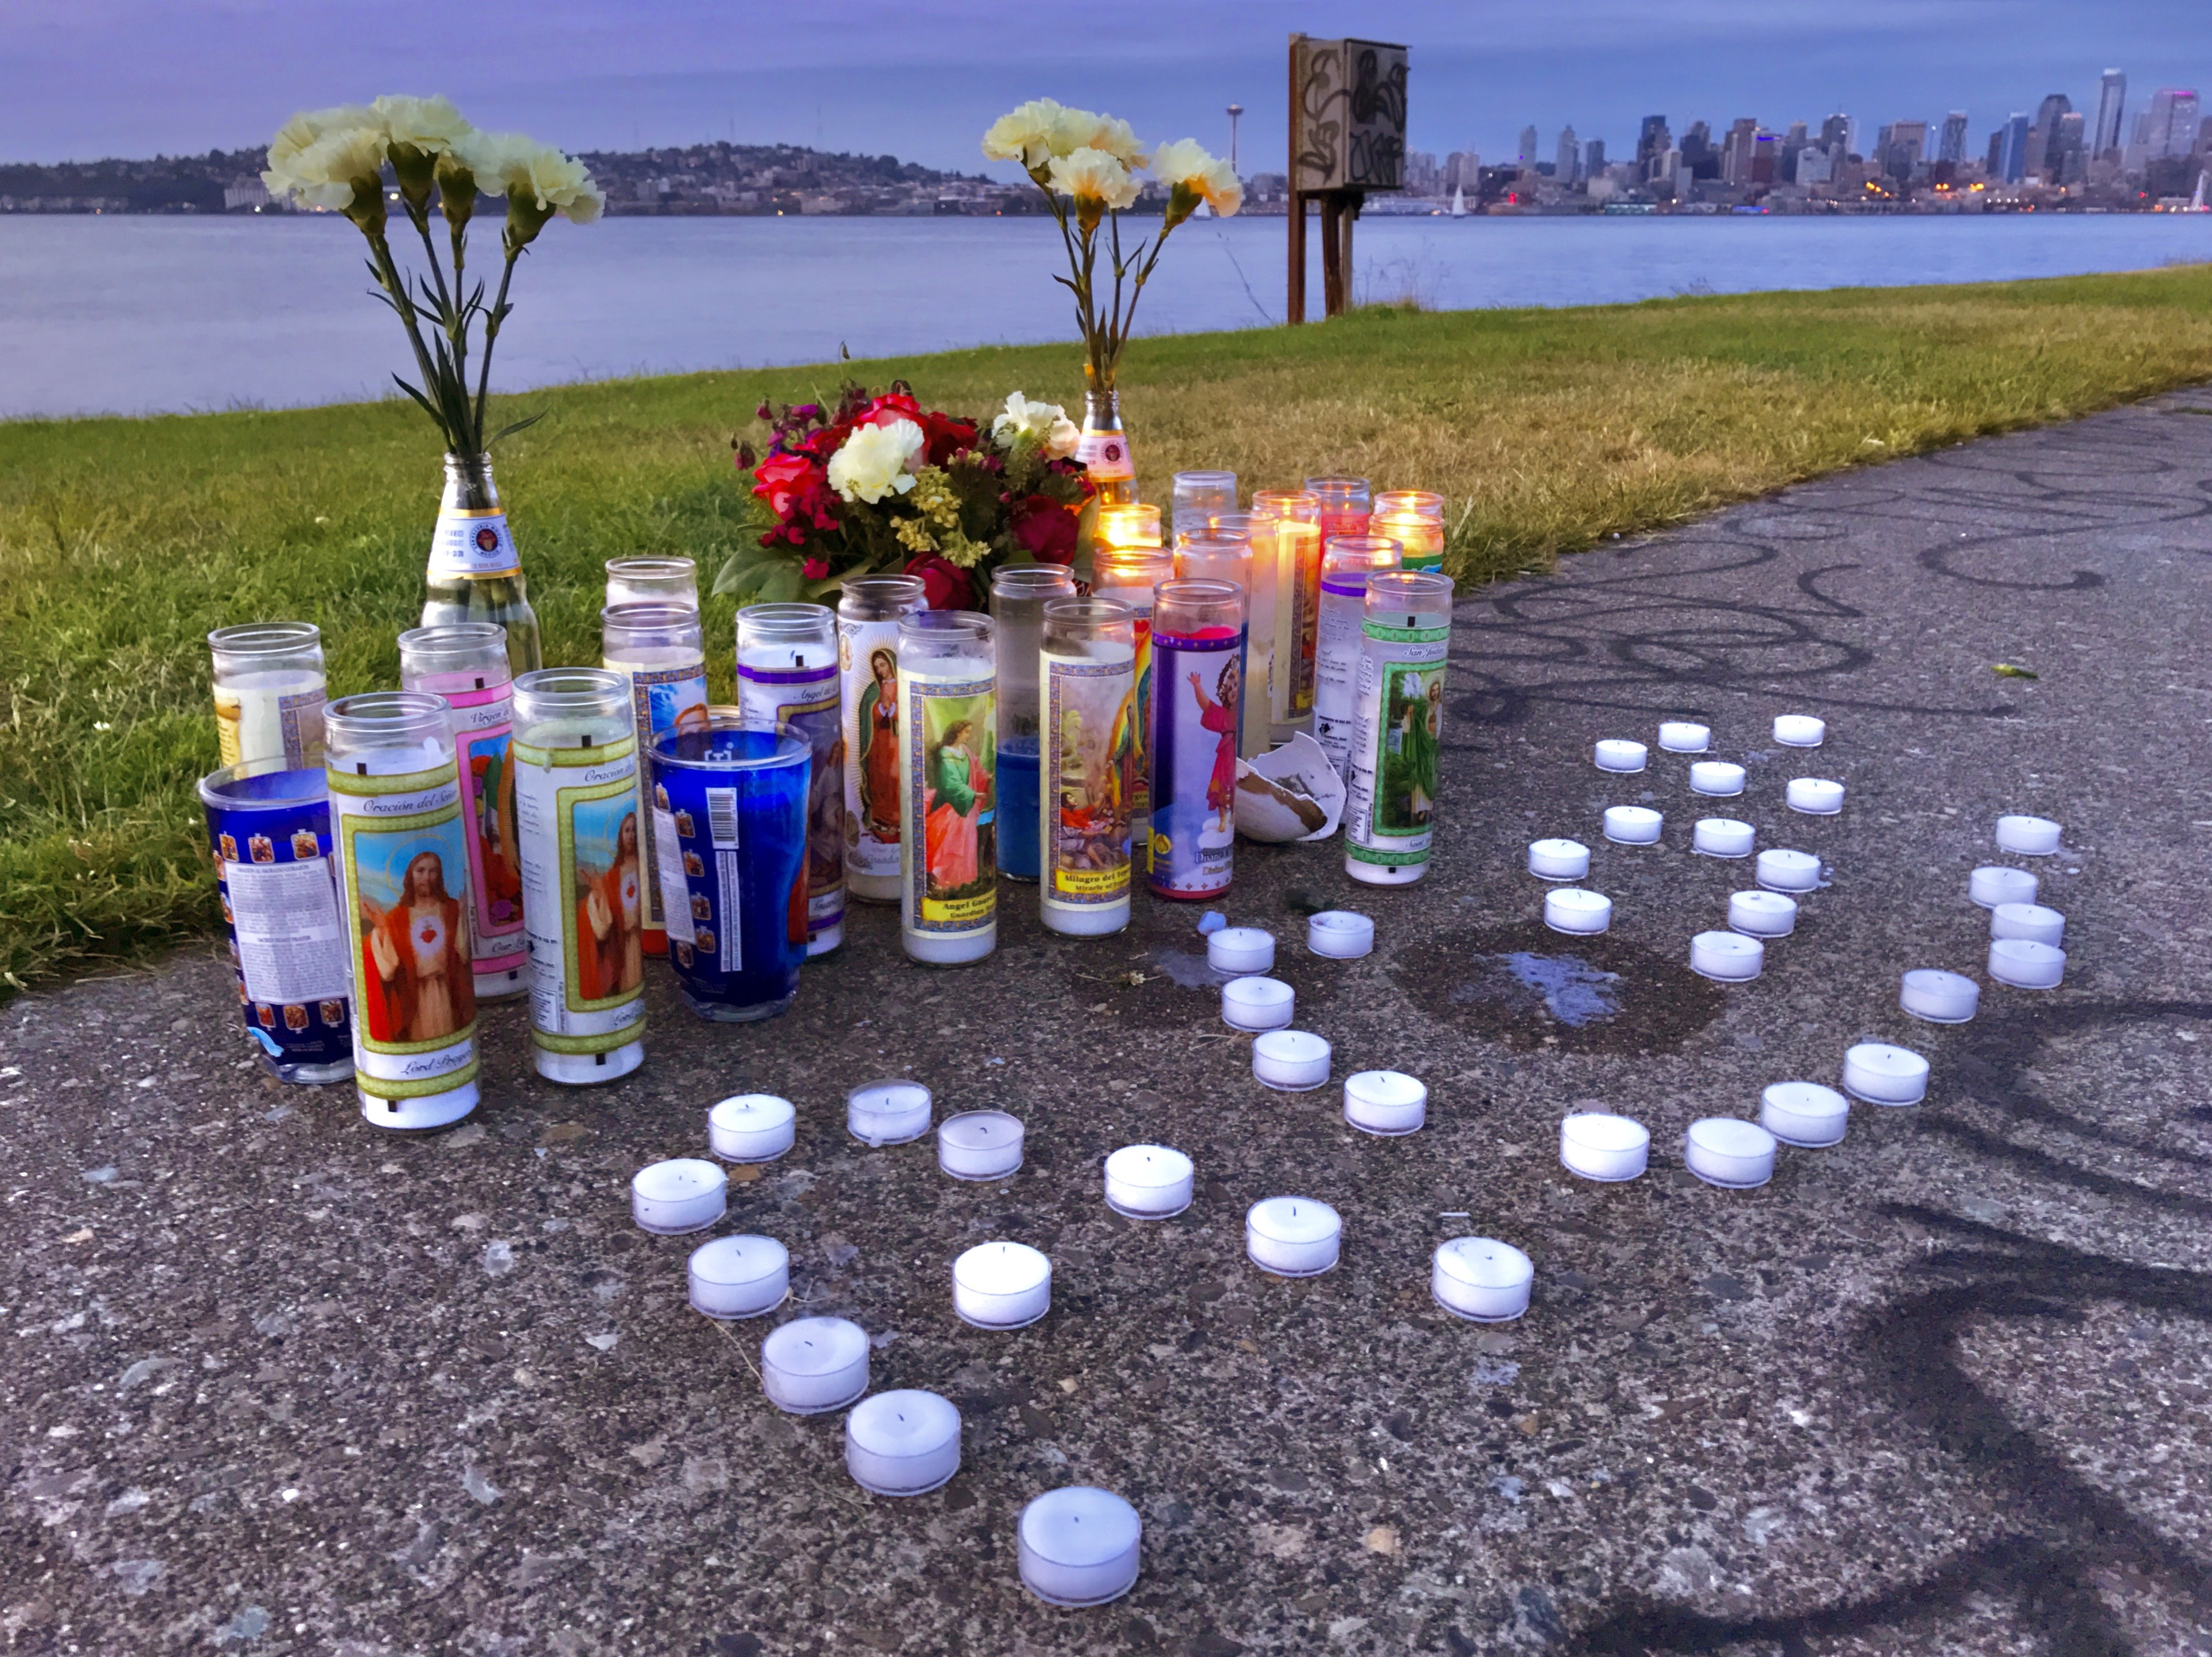 Jonathan C. "Acer" Pecina was memorialized at the spot he died near Anchor Park in West Seattle. Photo by Patrick Robinson